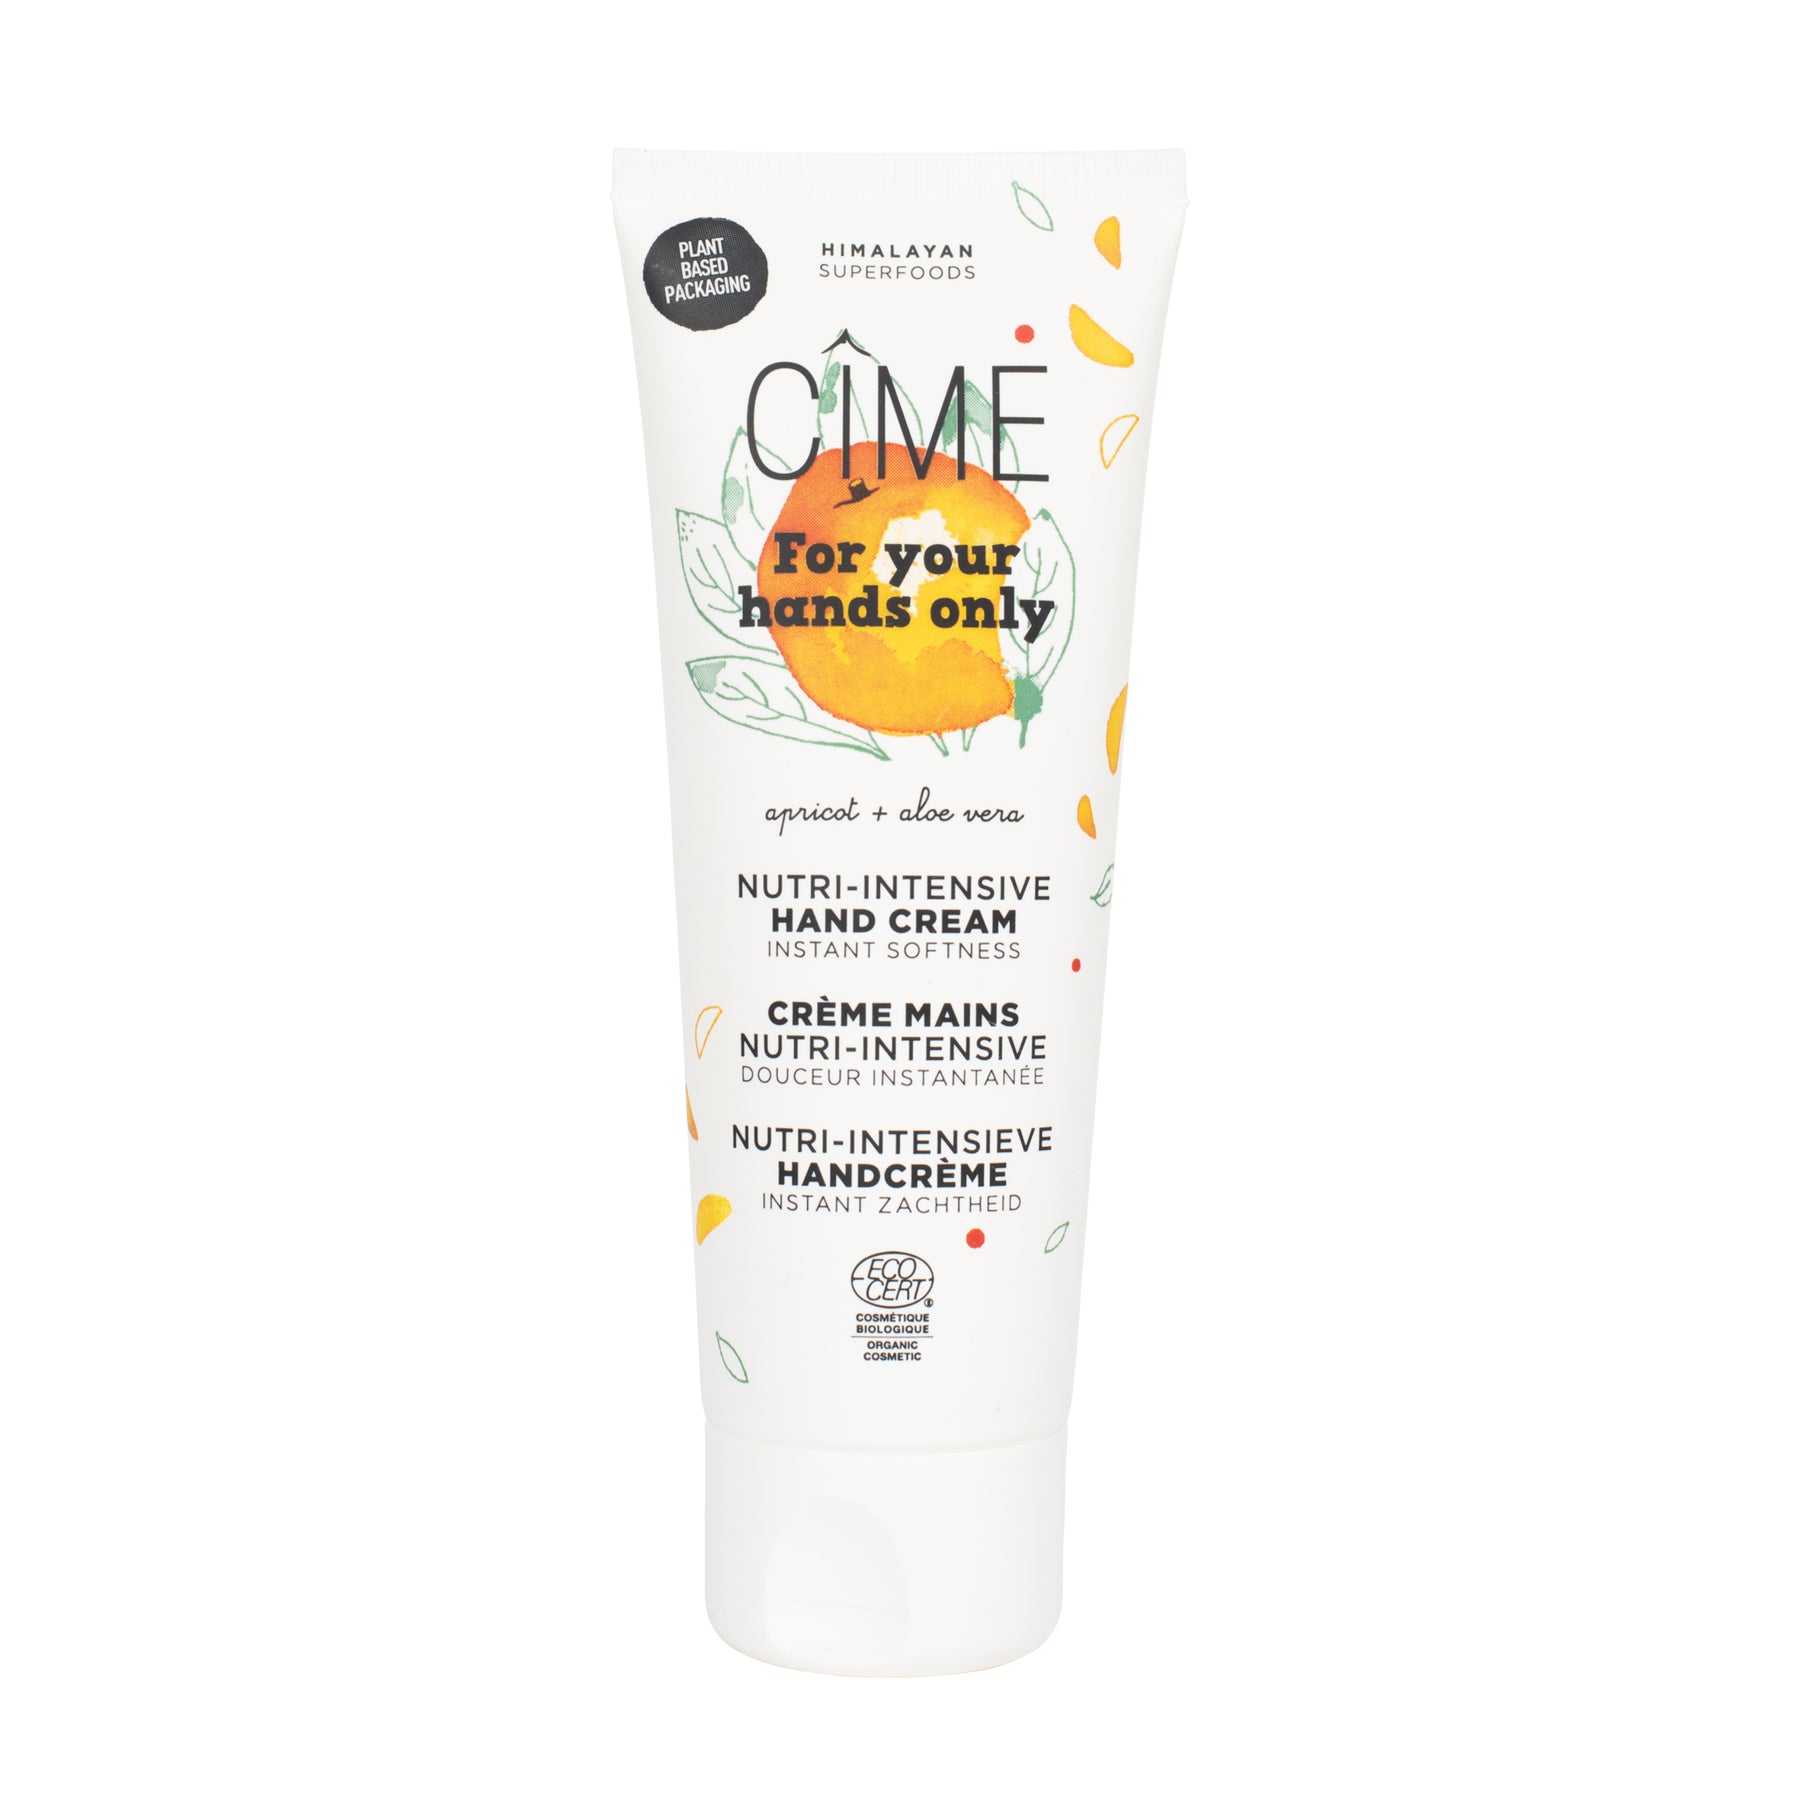 For your hands only | Nutri-intensive hand cream